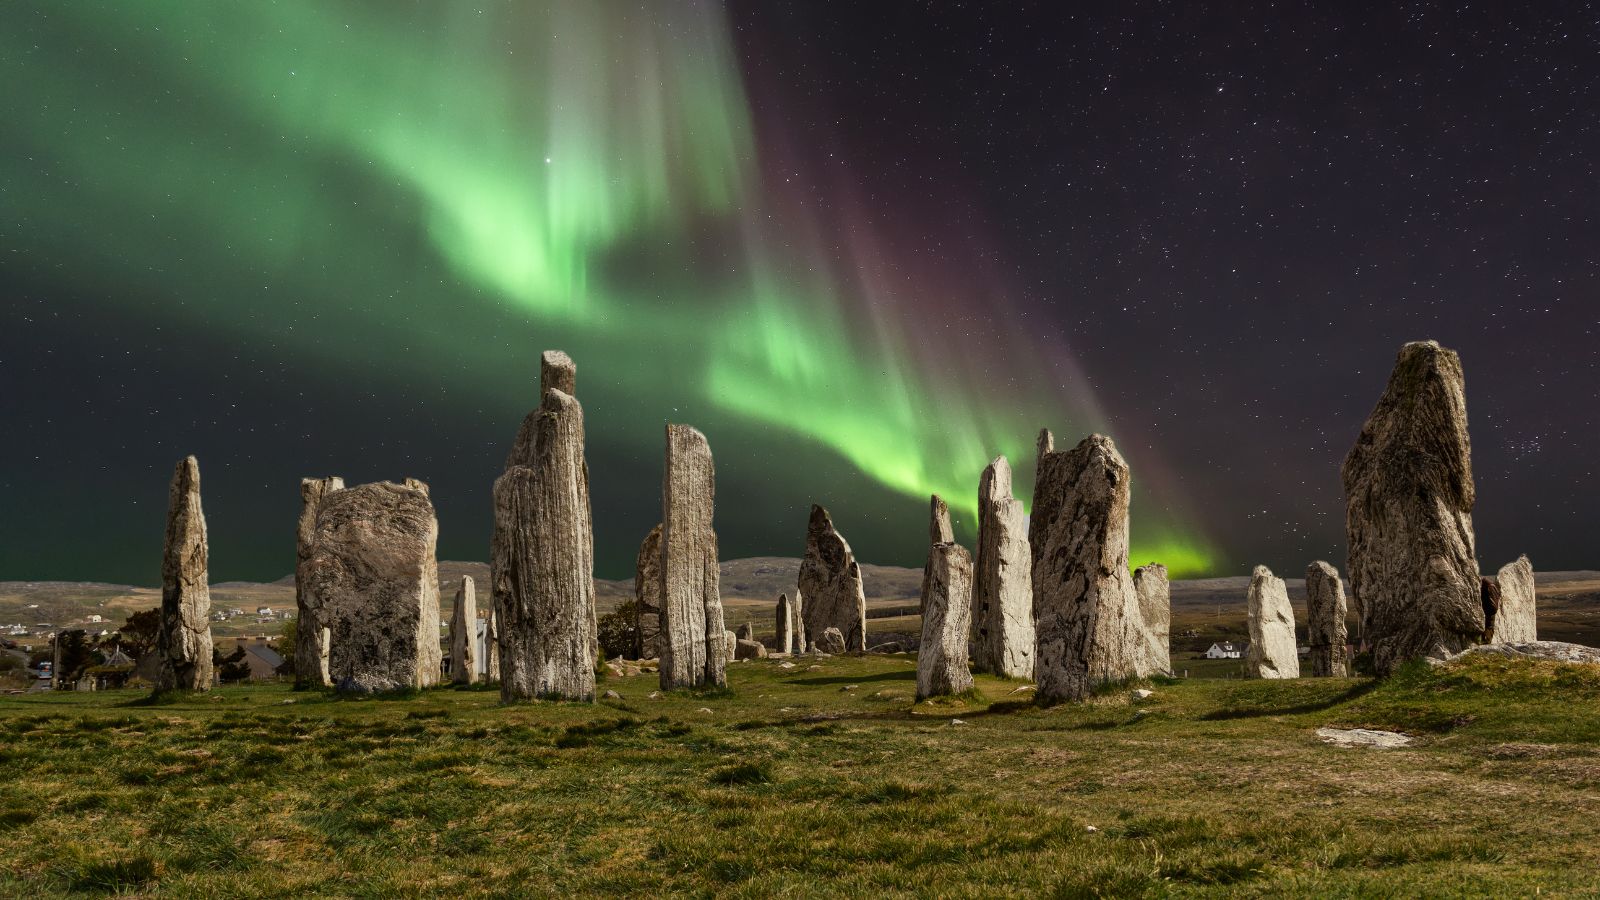 <p>Did you know northern Scotland has roughly the same latitude as some parts of Norway? This helps explain how – if you’re lucky – you can see the Aurora Borealis (AKA <em>the northern lights</em>).</p><p>Remember those Scottish islands? That’s where you’re most likely to see them – especially in wintertime, between September and March. Nights are at their longest and darkest, boosting the chance of seeing <a href="https://www.shetland.org/blog/what-are-the-mirrie-dancers" rel="noreferrer noopener">the Mirrie Dancers</a> (Shetland’s name for the Aurora Borealis).</p>